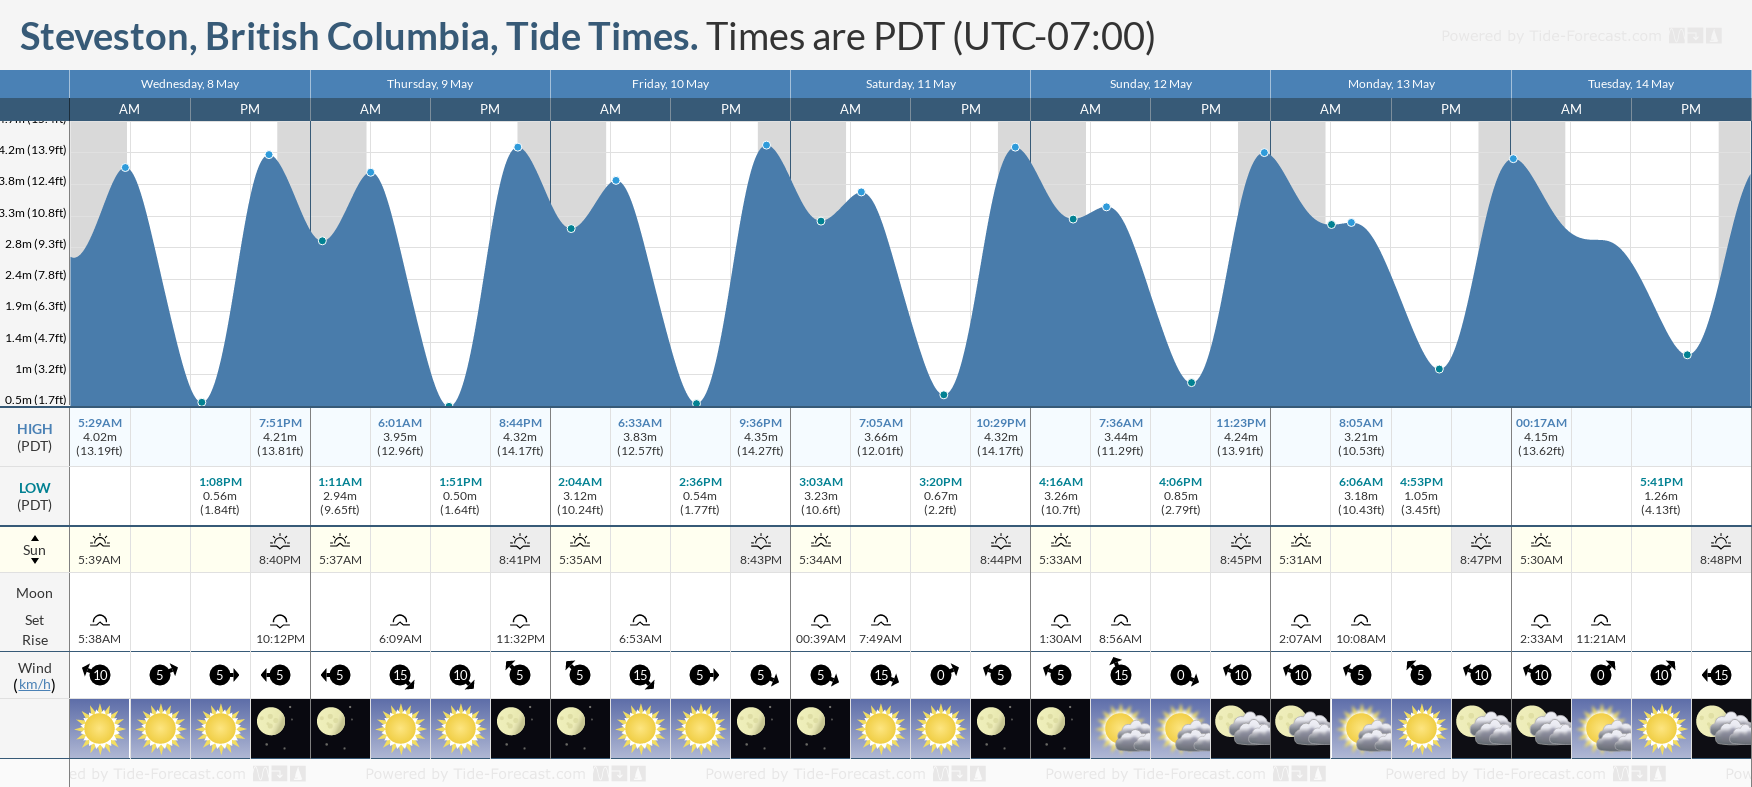 Steveston, British Columbia Tide Chart including high and low tide tide times for the next 7 days